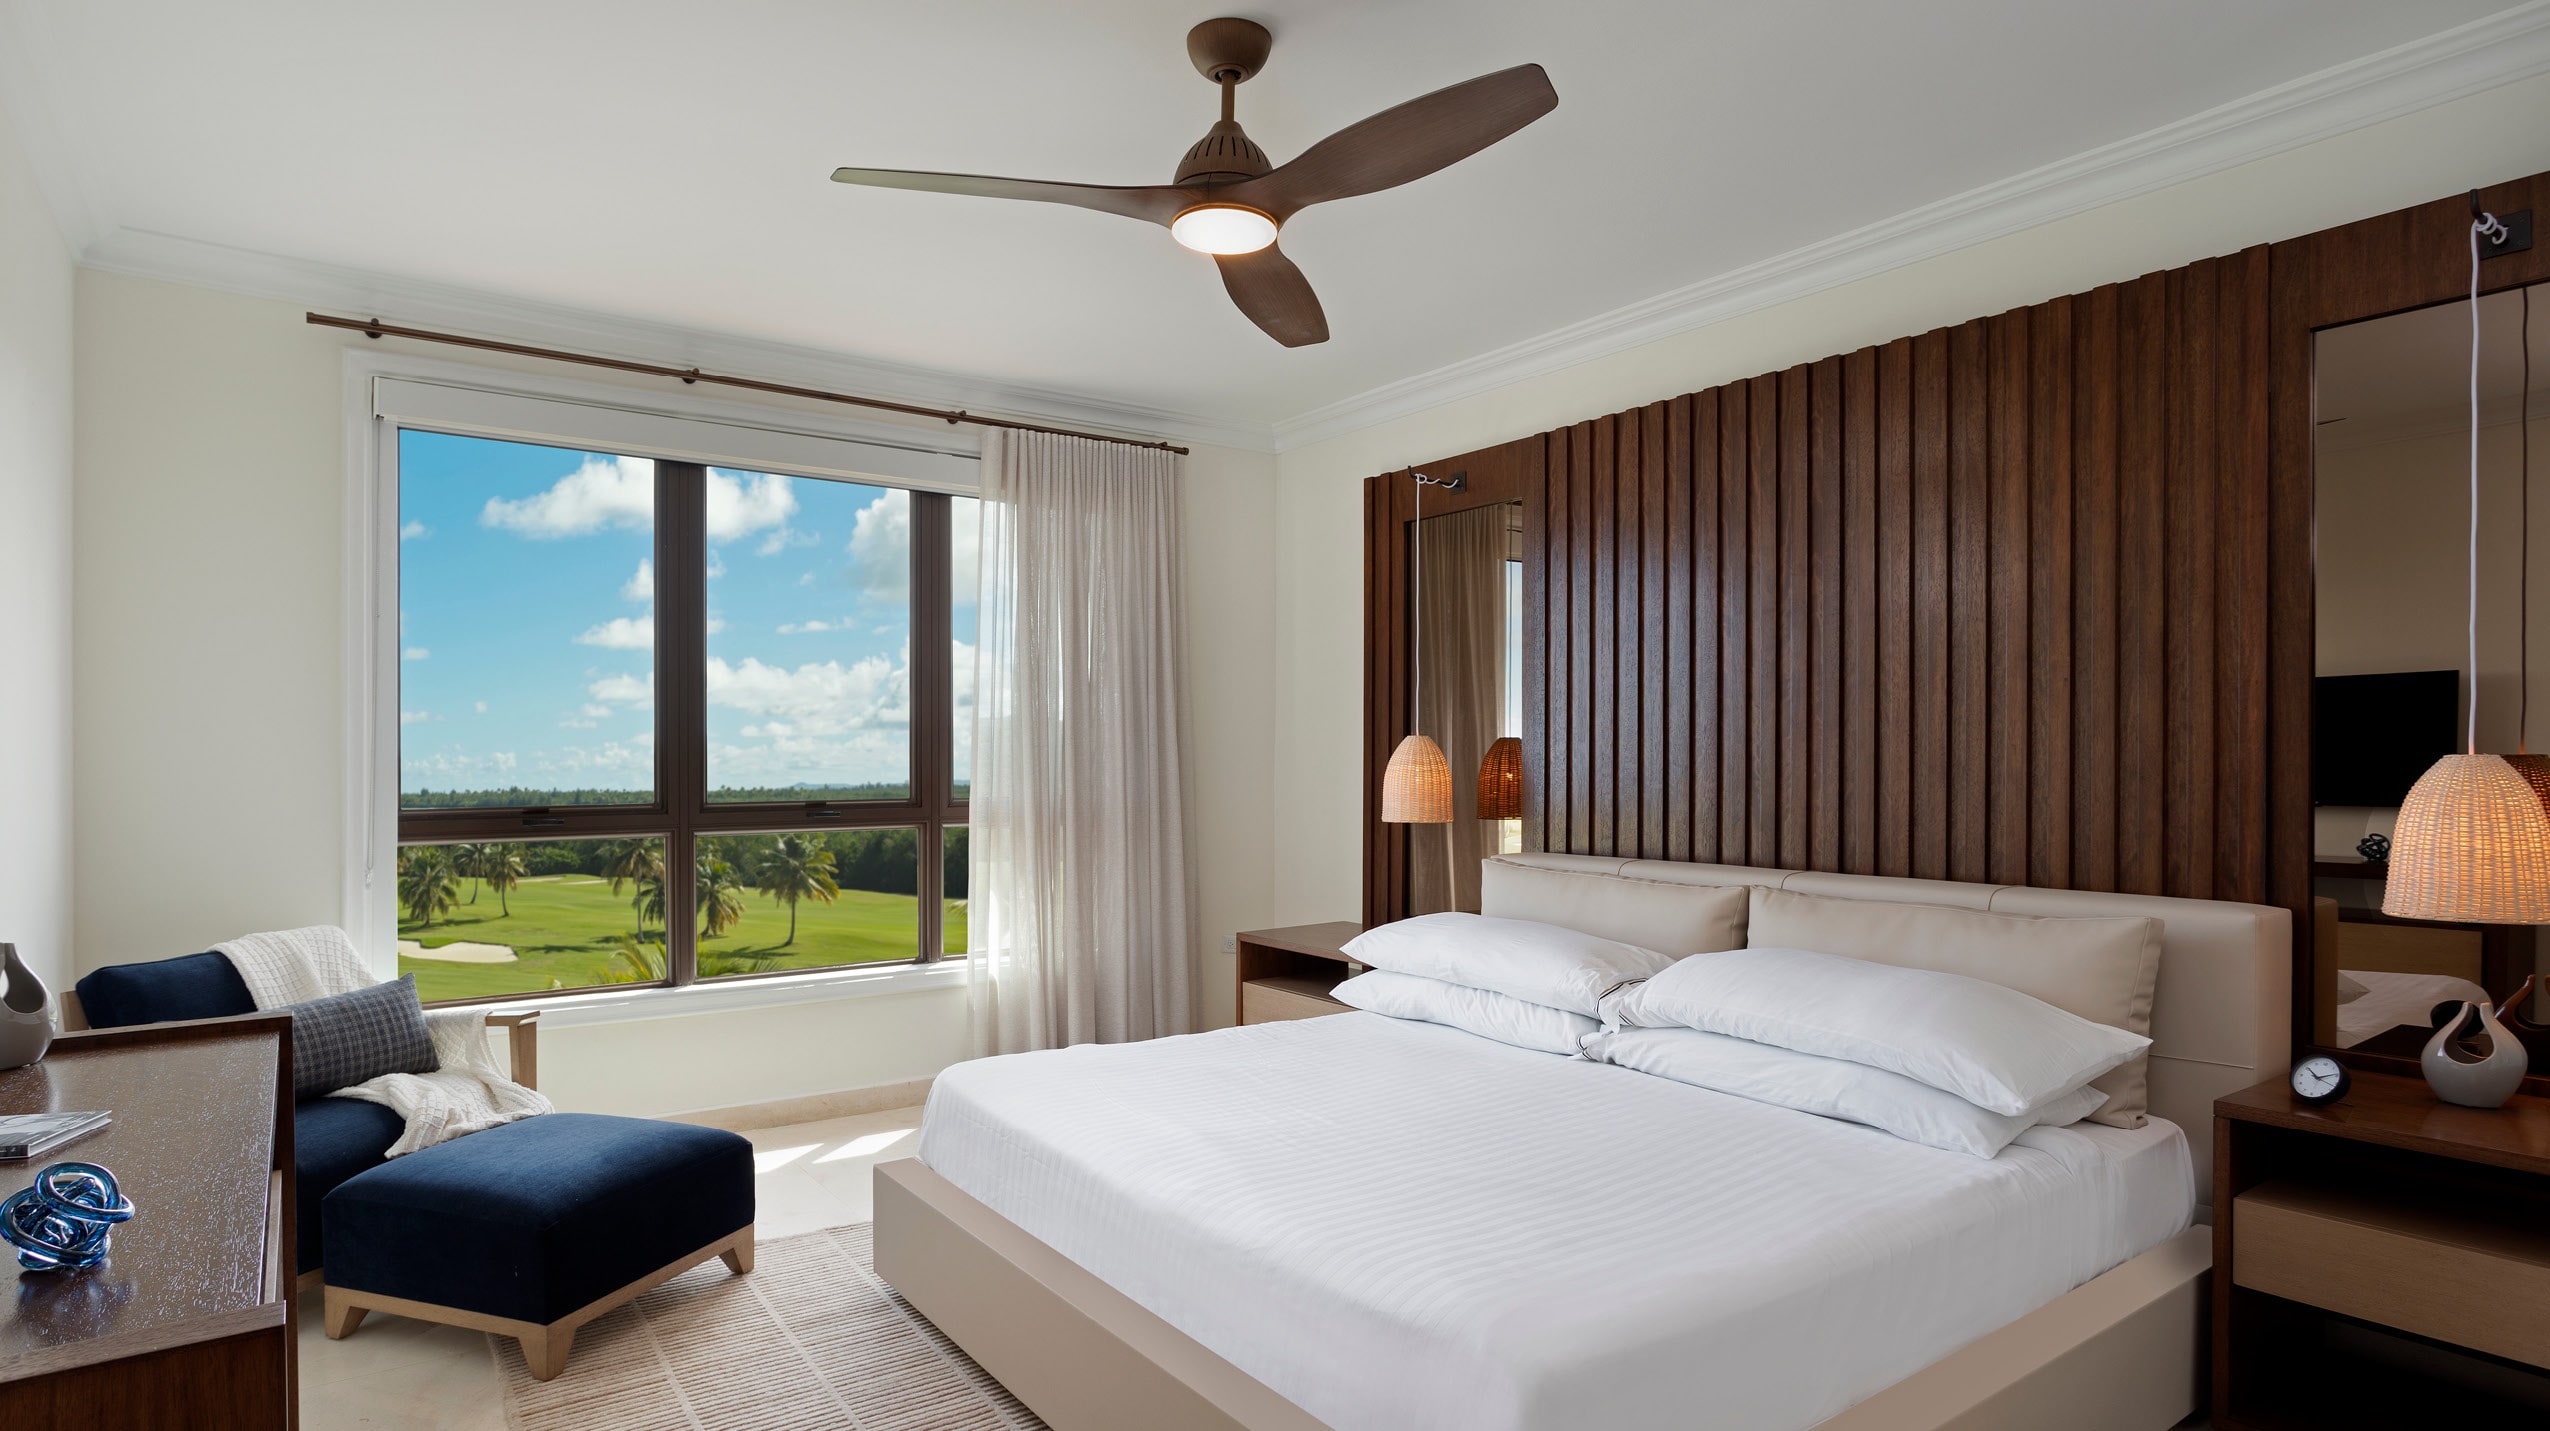 A well-appointed room at the Celeste Country Club Residences with a king-size bed, stylish furnishings, and a panoramic window offering views of the Grand Reserve golf course.